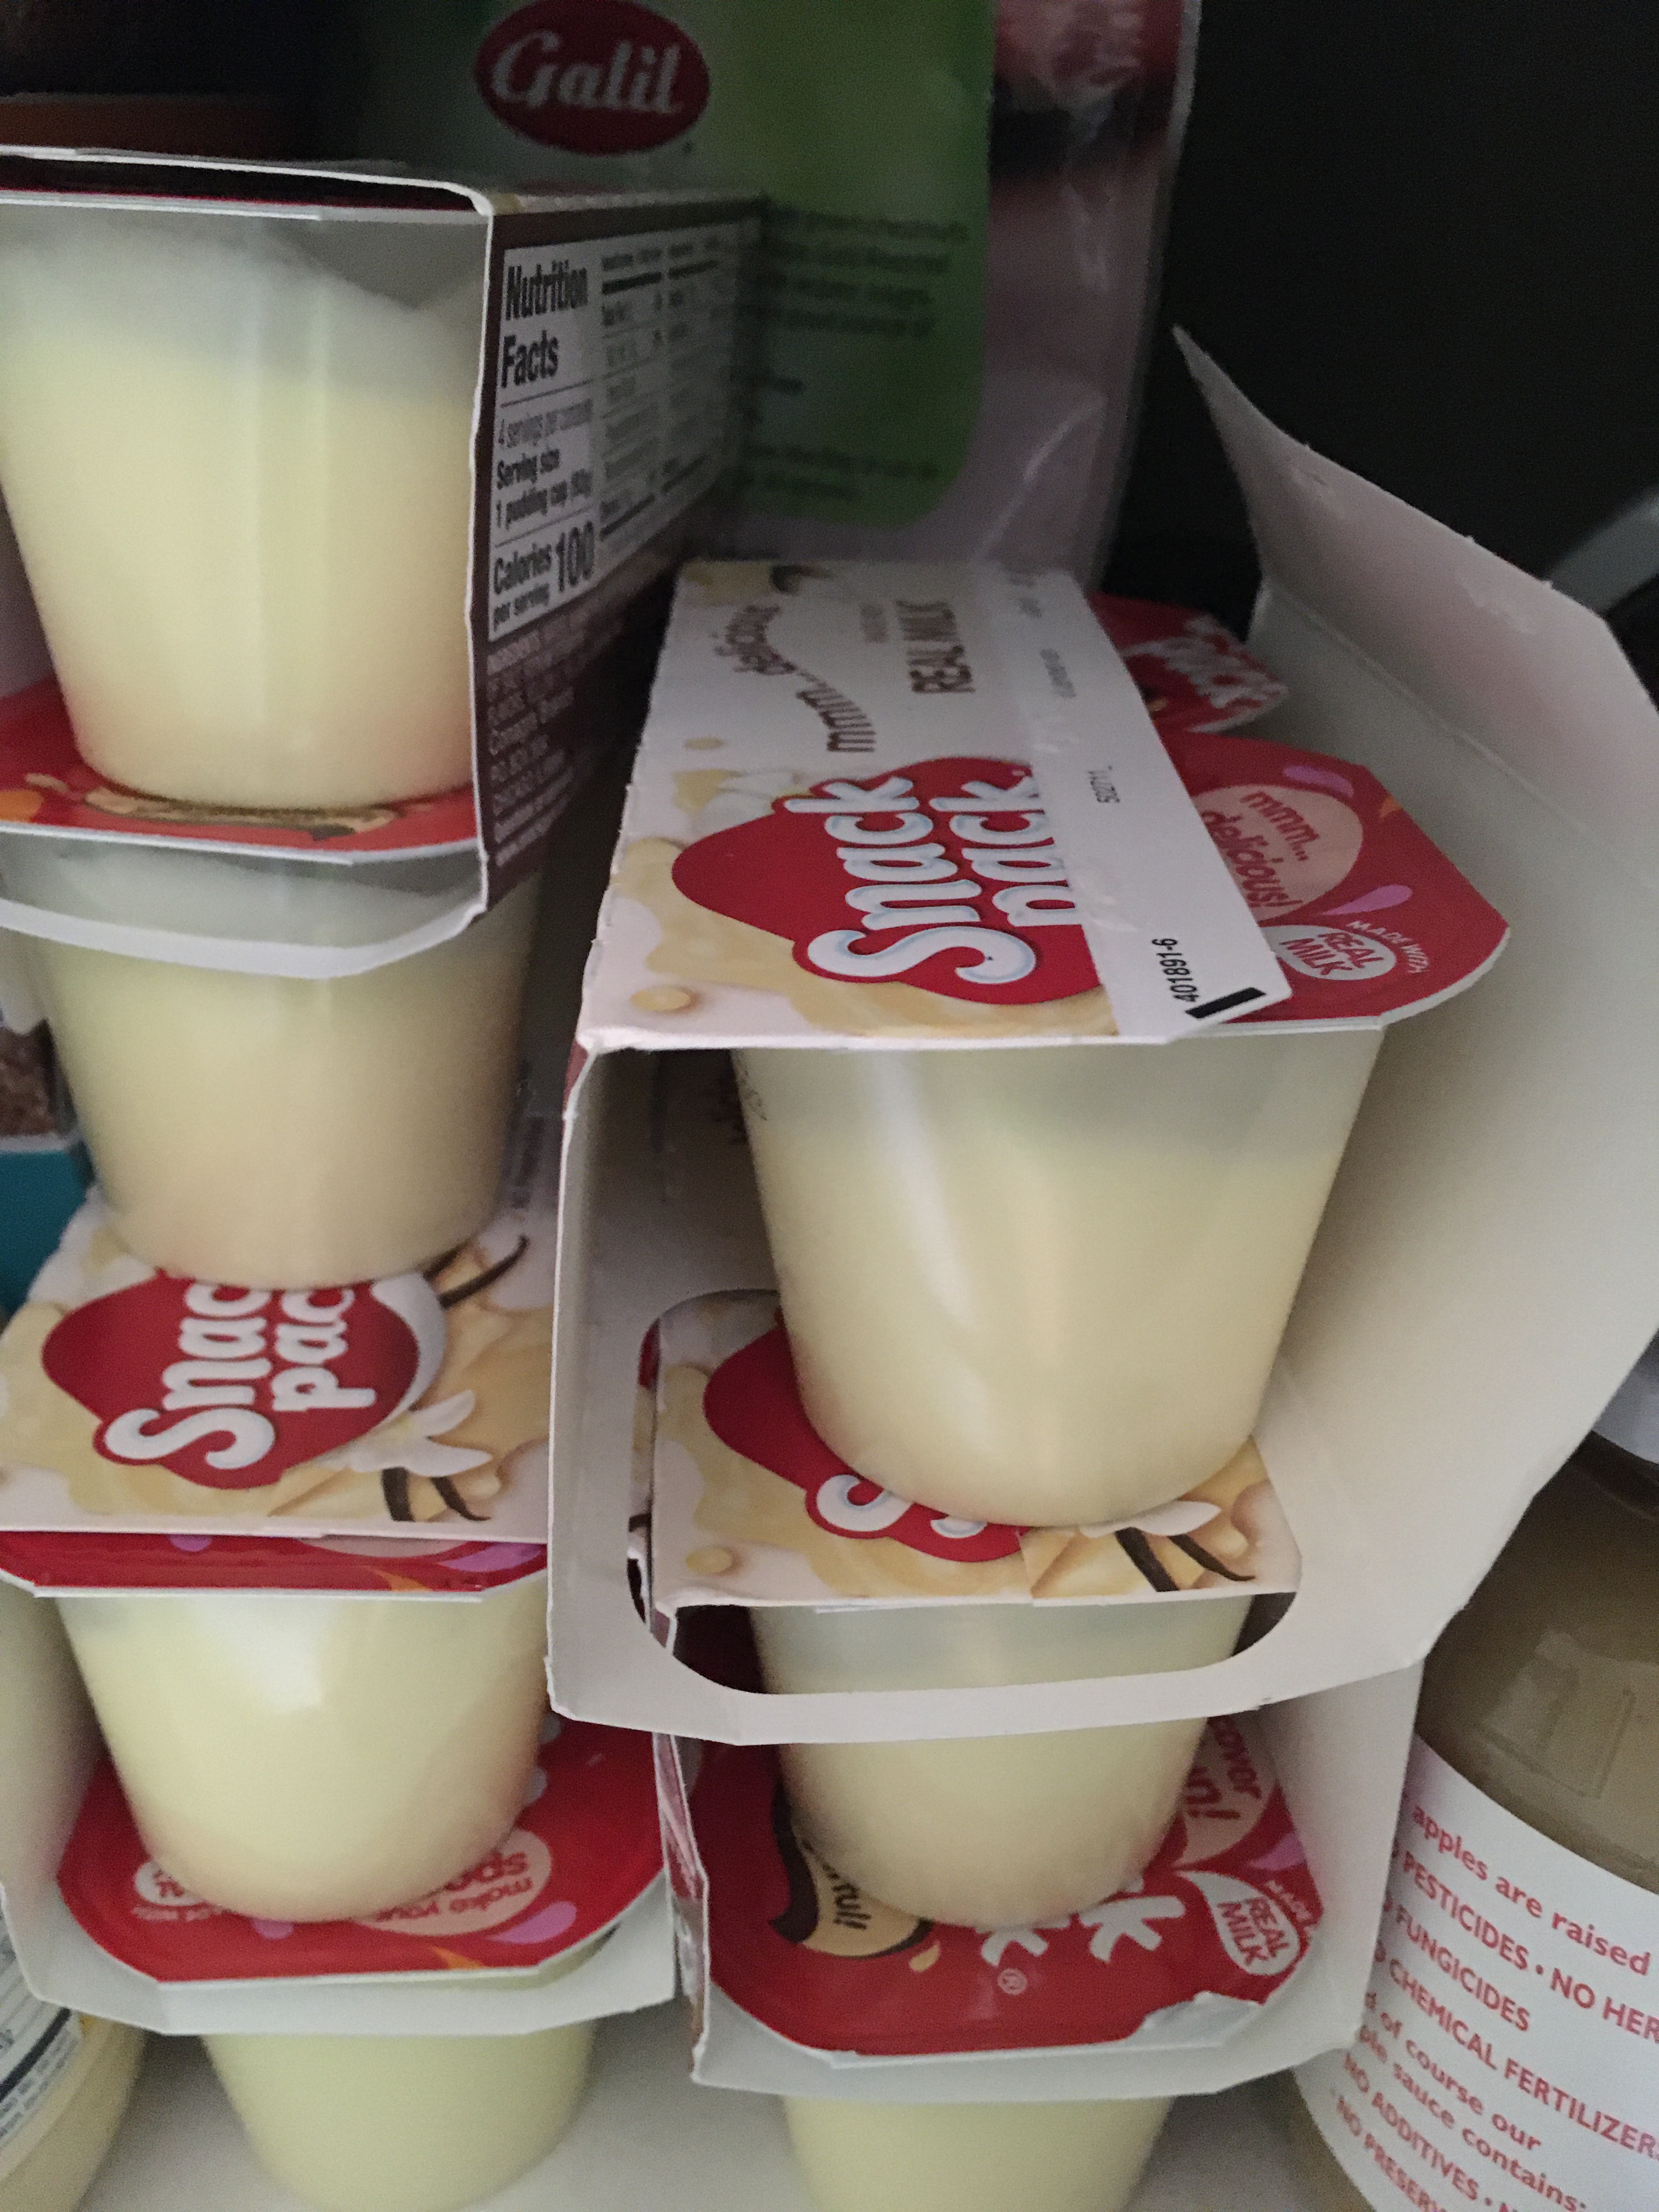 Photo of a stack of Snack Pack vanilla pudding cups